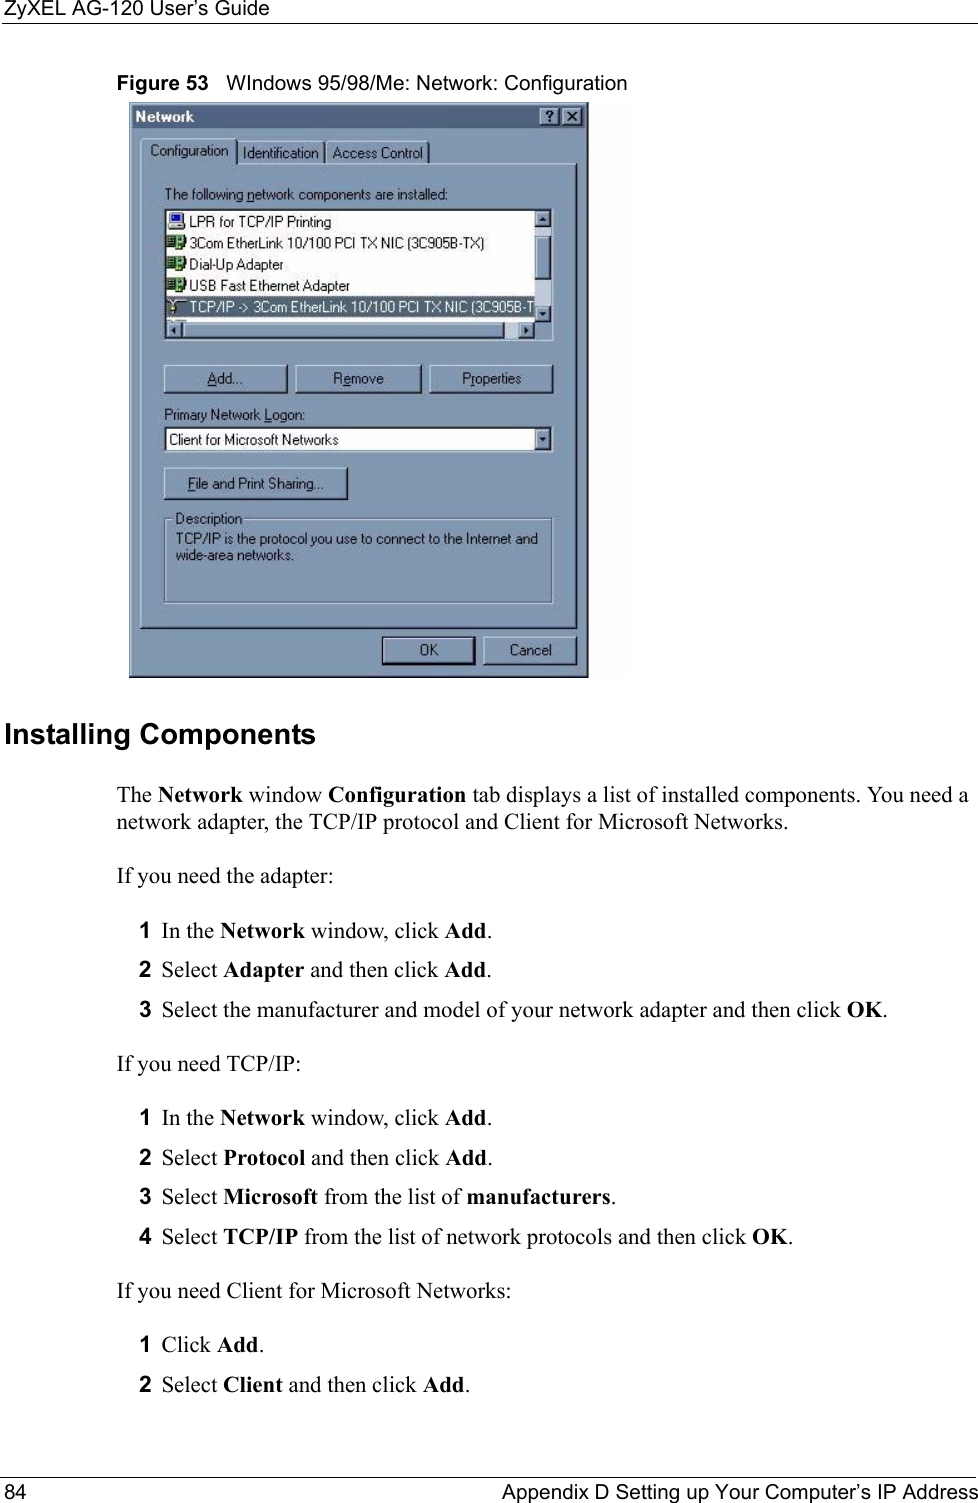 ZyXEL AG-120 User’s Guide84 Appendix D Setting up Your Computer’s IP AddressFigure 53   WIndows 95/98/Me: Network: ConfigurationInstalling ComponentsThe Network window Configuration tab displays a list of installed components. You need a network adapter, the TCP/IP protocol and Client for Microsoft Networks.If you need the adapter:1In the Network window, click Add.2Select Adapter and then click Add.3Select the manufacturer and model of your network adapter and then click OK.If you need TCP/IP:1In the Network window, click Add.2Select Protocol and then click Add.3Select Microsoft from the list of manufacturers.4Select TCP/IP from the list of network protocols and then click OK.If you need Client for Microsoft Networks:1Click Add.2Select Client and then click Add.